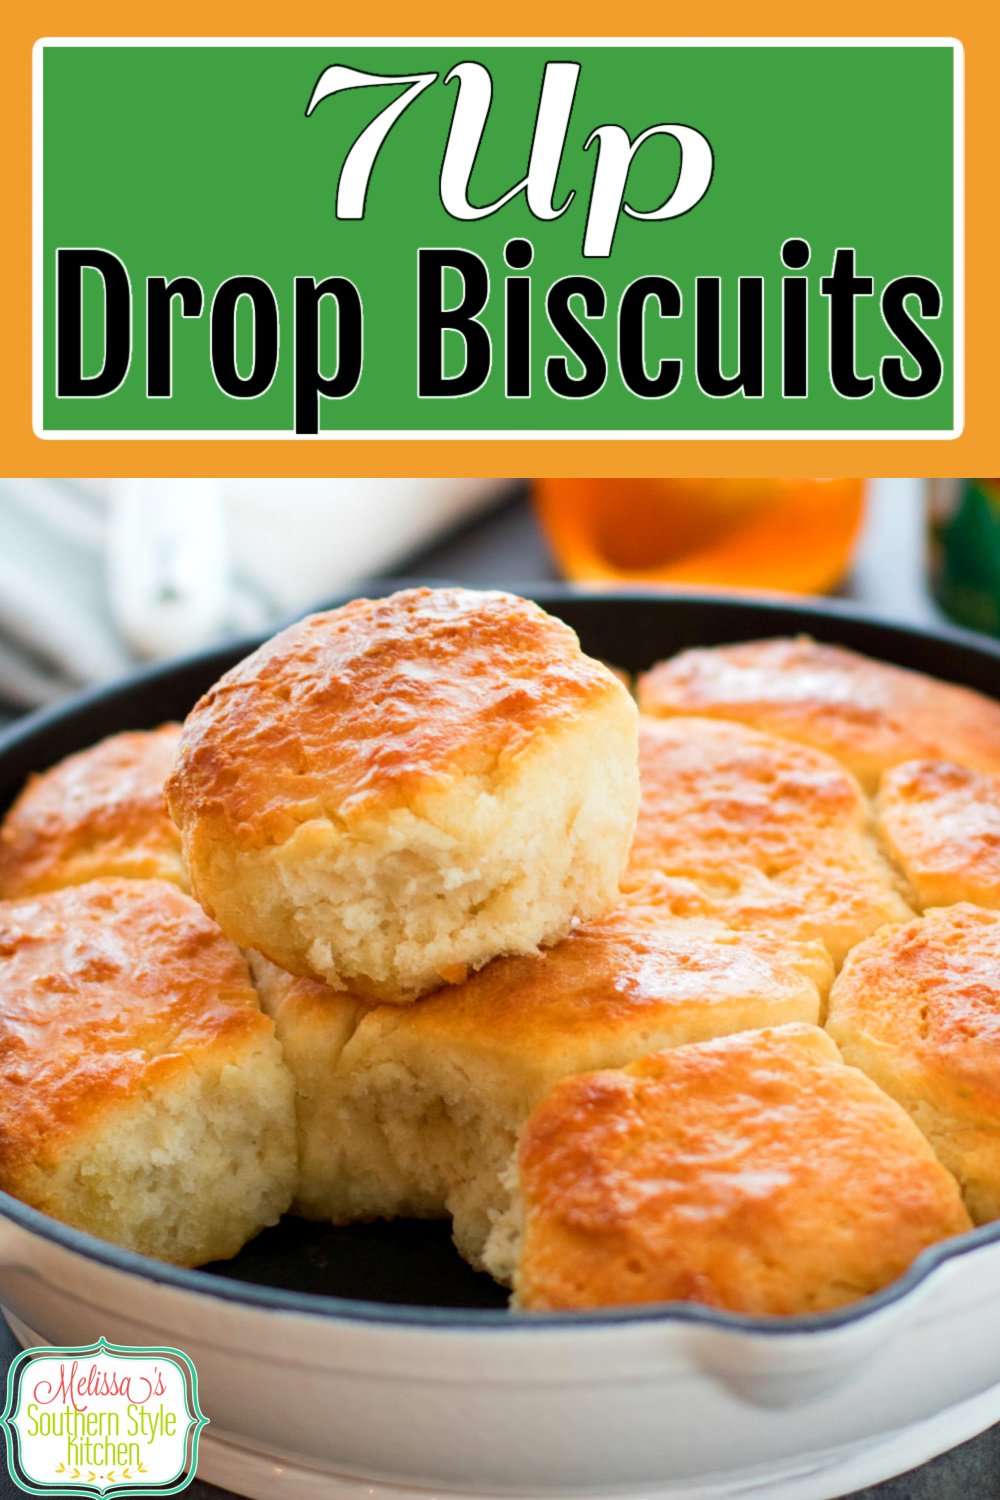 No rolling and cutting is required to make these buttery 7UP Drop Biscuits #dropbiscuits #7UP #biscuitrecipes #breadrecipes #southernbiscuits #southernfood #southernrecipes #brunch #breakfast via @melissasssk